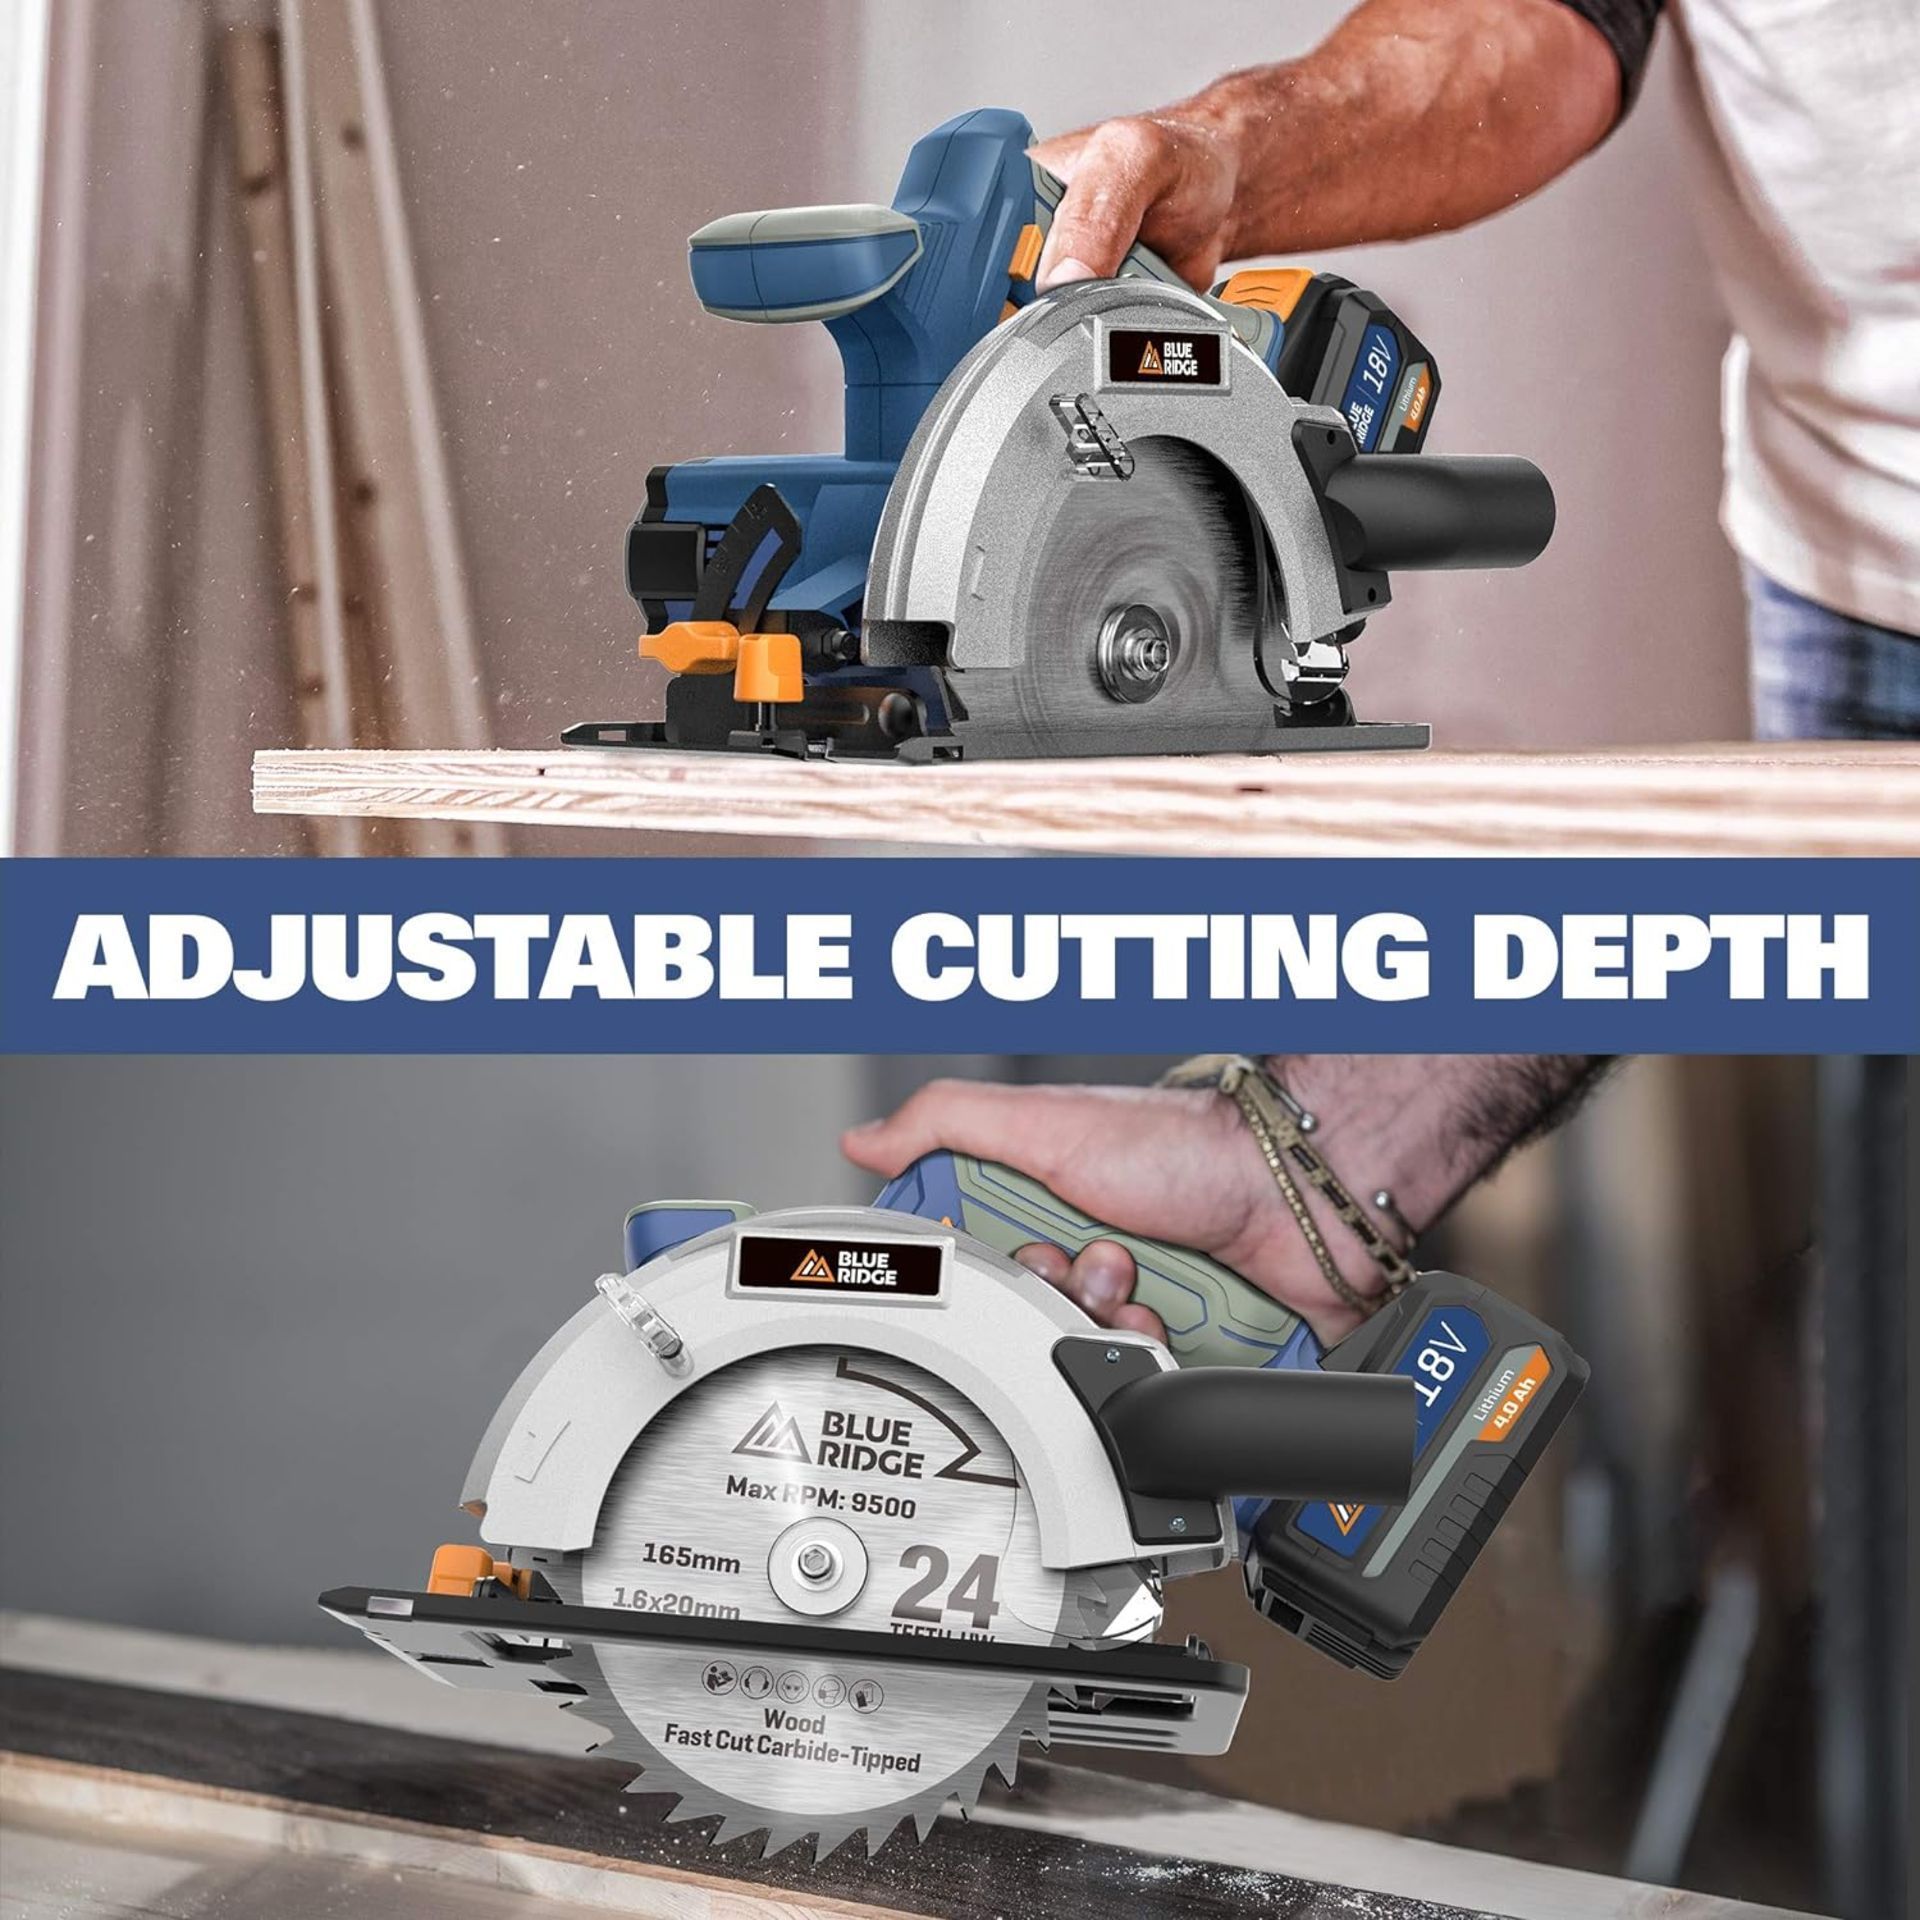 2x NEW & BOXED BLUE RIDGE 165MM Cordless Circular Saw 18V with 4.0Ah Battery. RRP £99.99 EACH. - Image 3 of 6